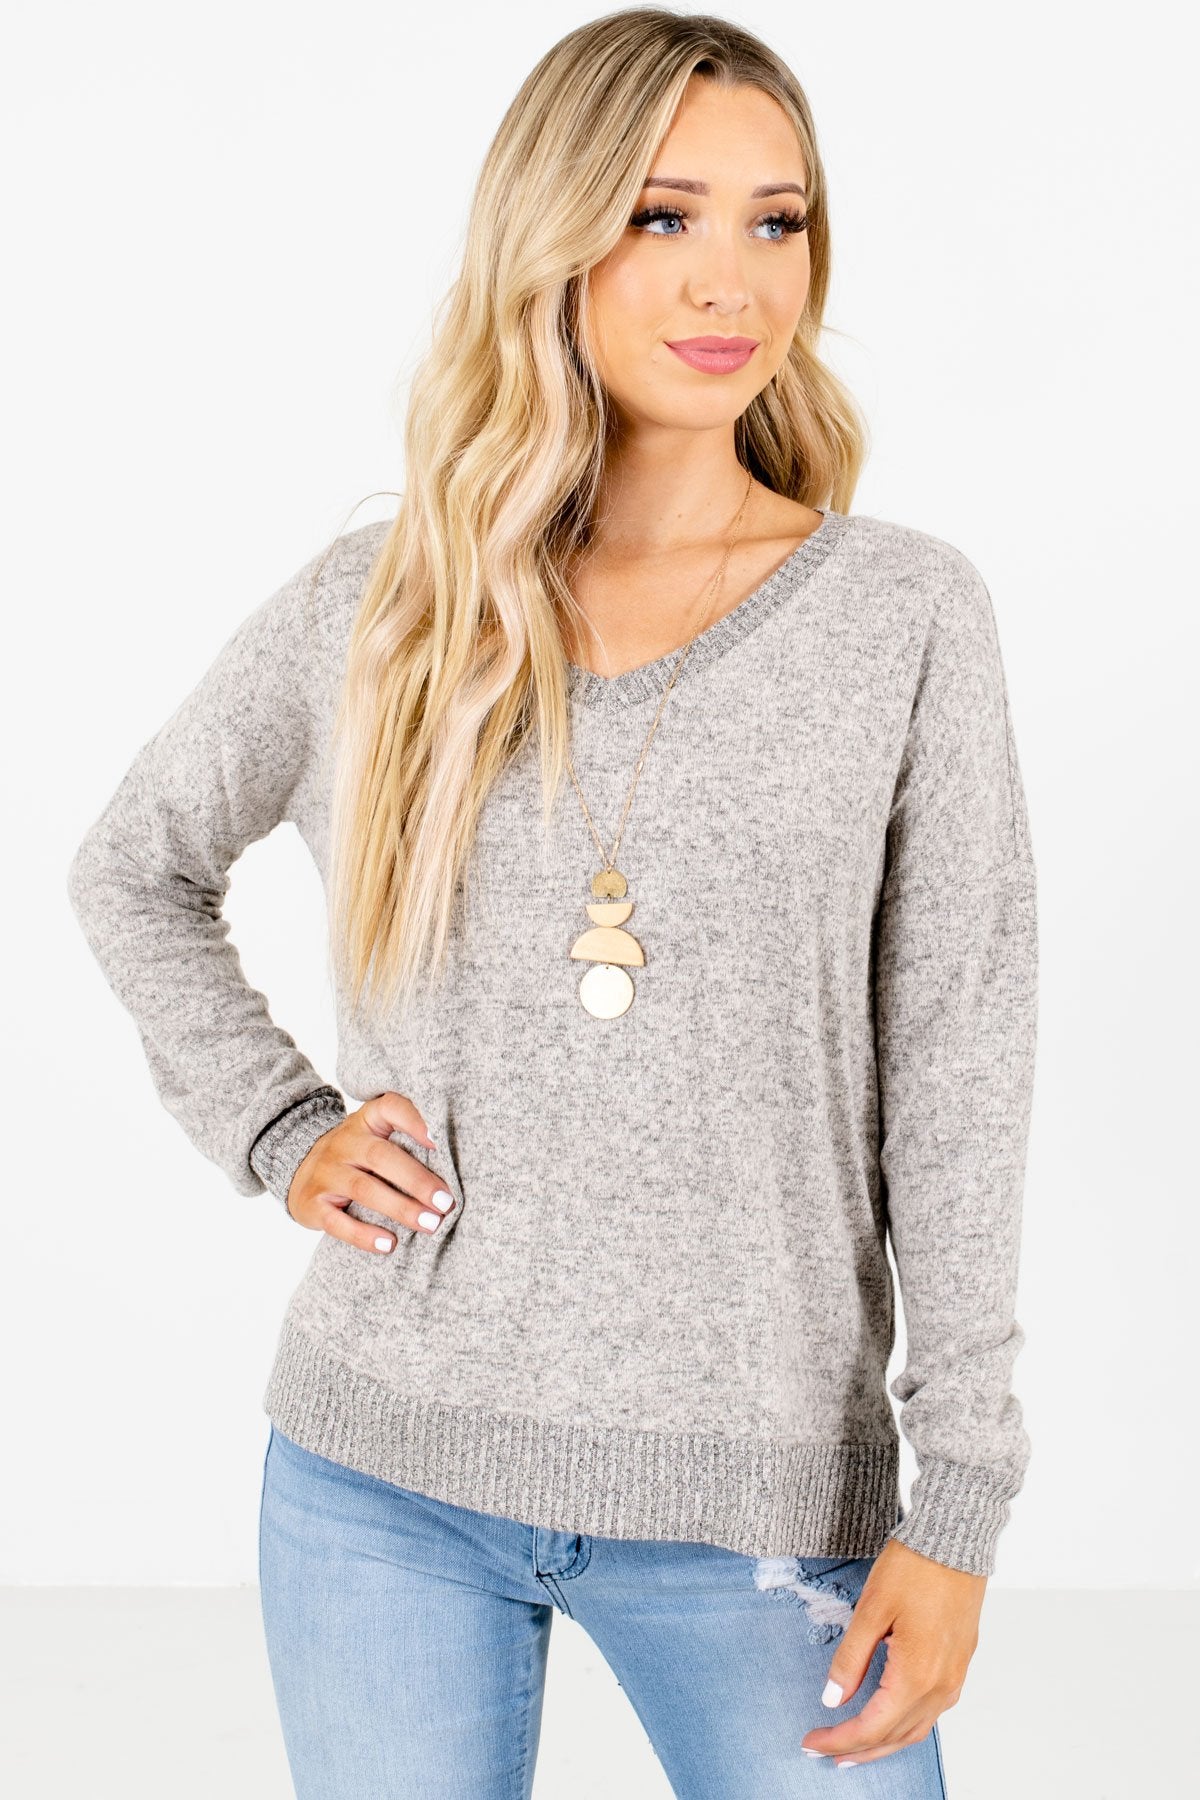 Taupe Brown V-Neckline Boutique Tops for Women